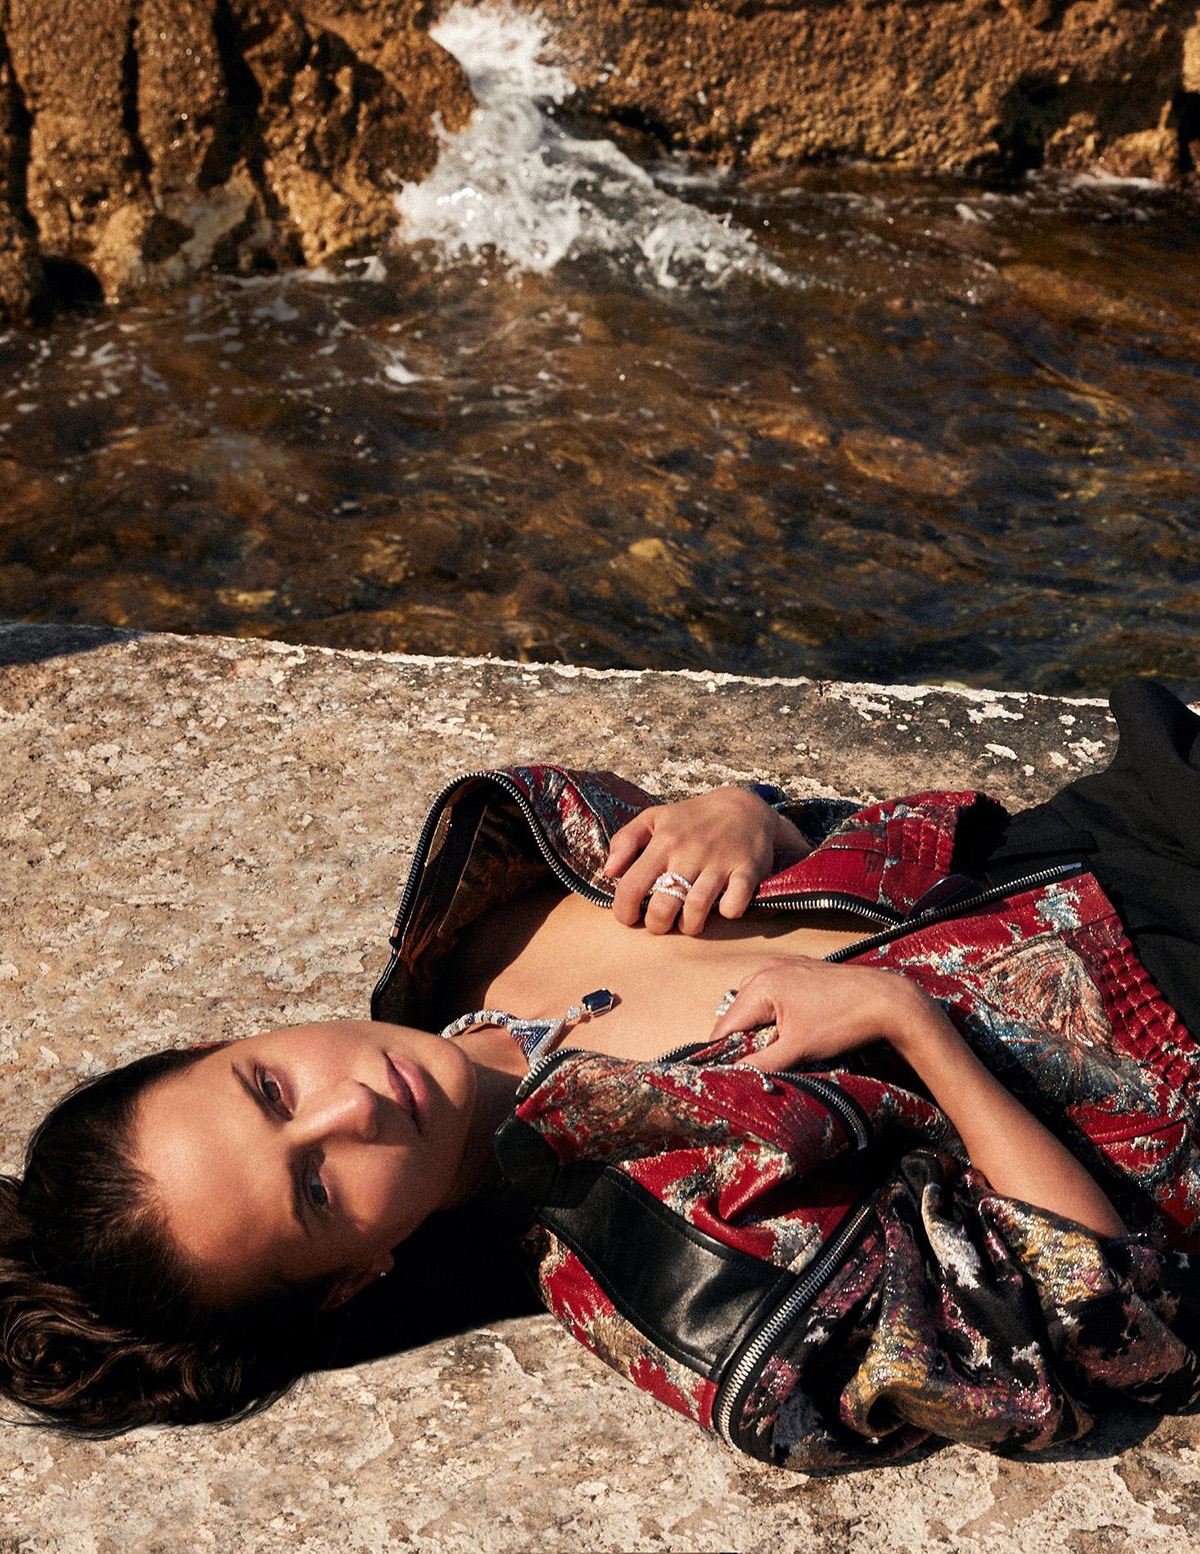 Alicia Vikander in Louis Vuitton on Madame Figaro December 31st, 2021 by David Roemer